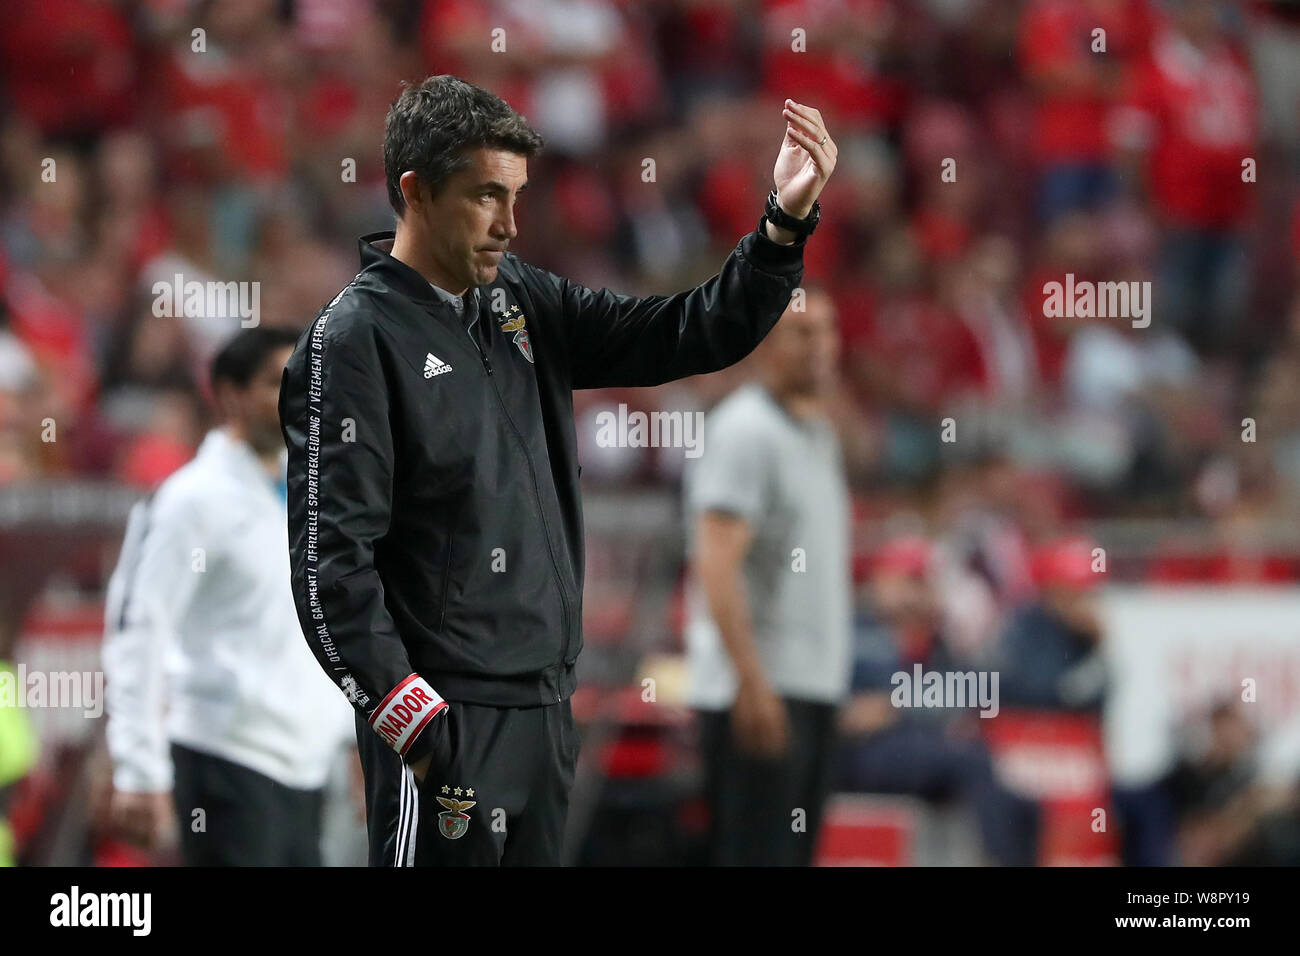 Lisbon, Portugal. 10th Aug, 2019. Benfica's head coach Bruno Lage gestures during the Portuguese league football match between Benfica and Pacos de Ferreira in Lisbon, Portugal, on Aug. 10, 2019. Credit: Petro Fiuza/Xinhua/Alamy Live News Stock Photo